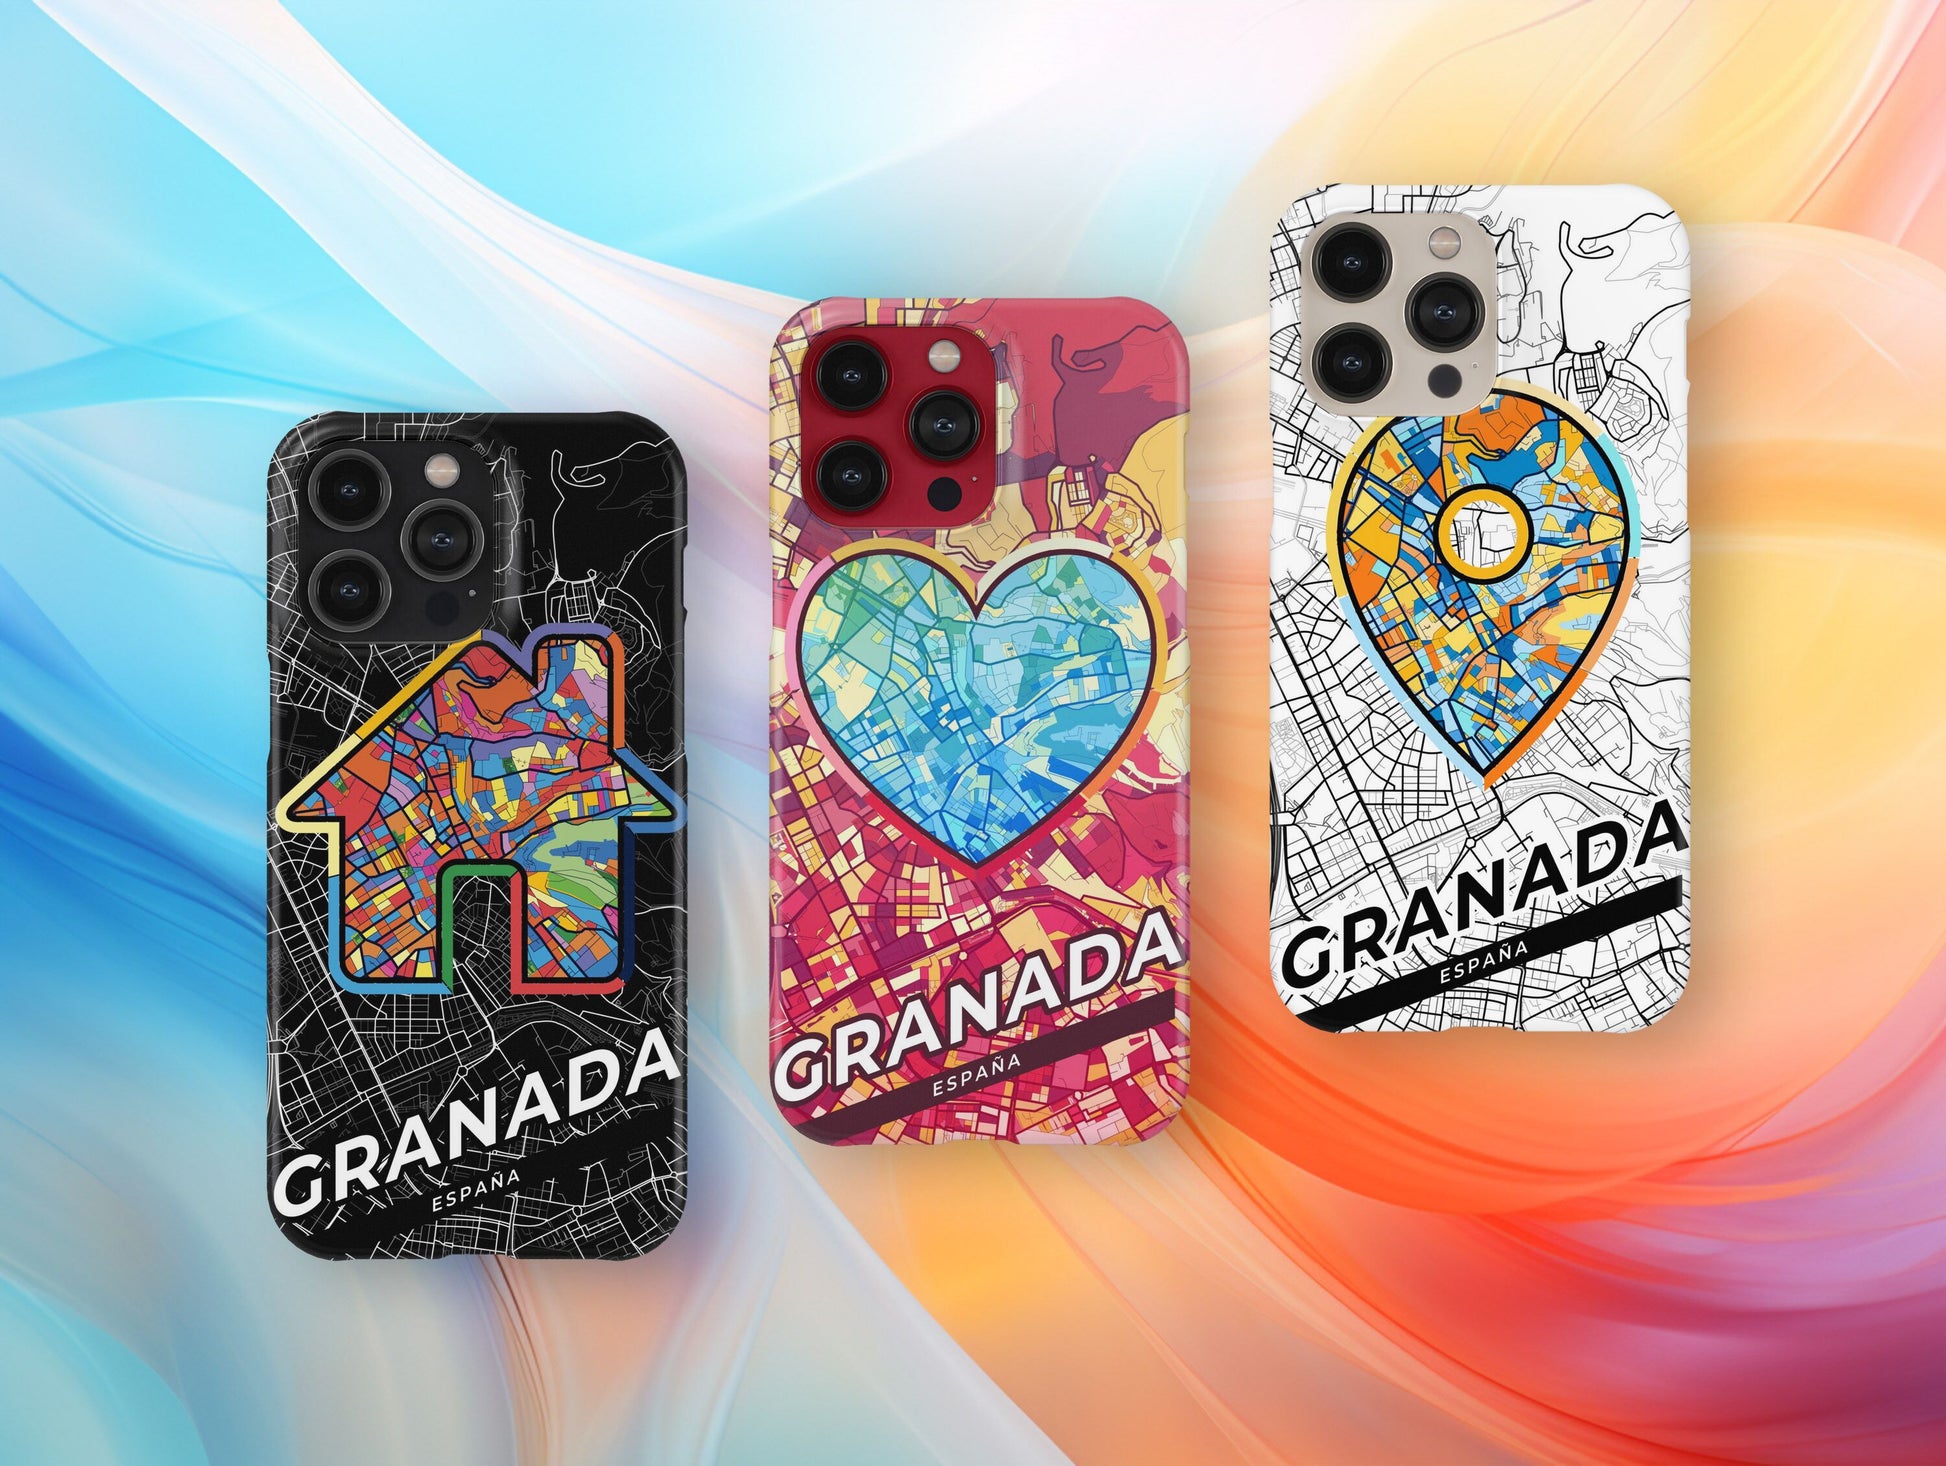 Granada Spain slim phone case with colorful icon. Birthday, wedding or housewarming gift. Couple match cases.